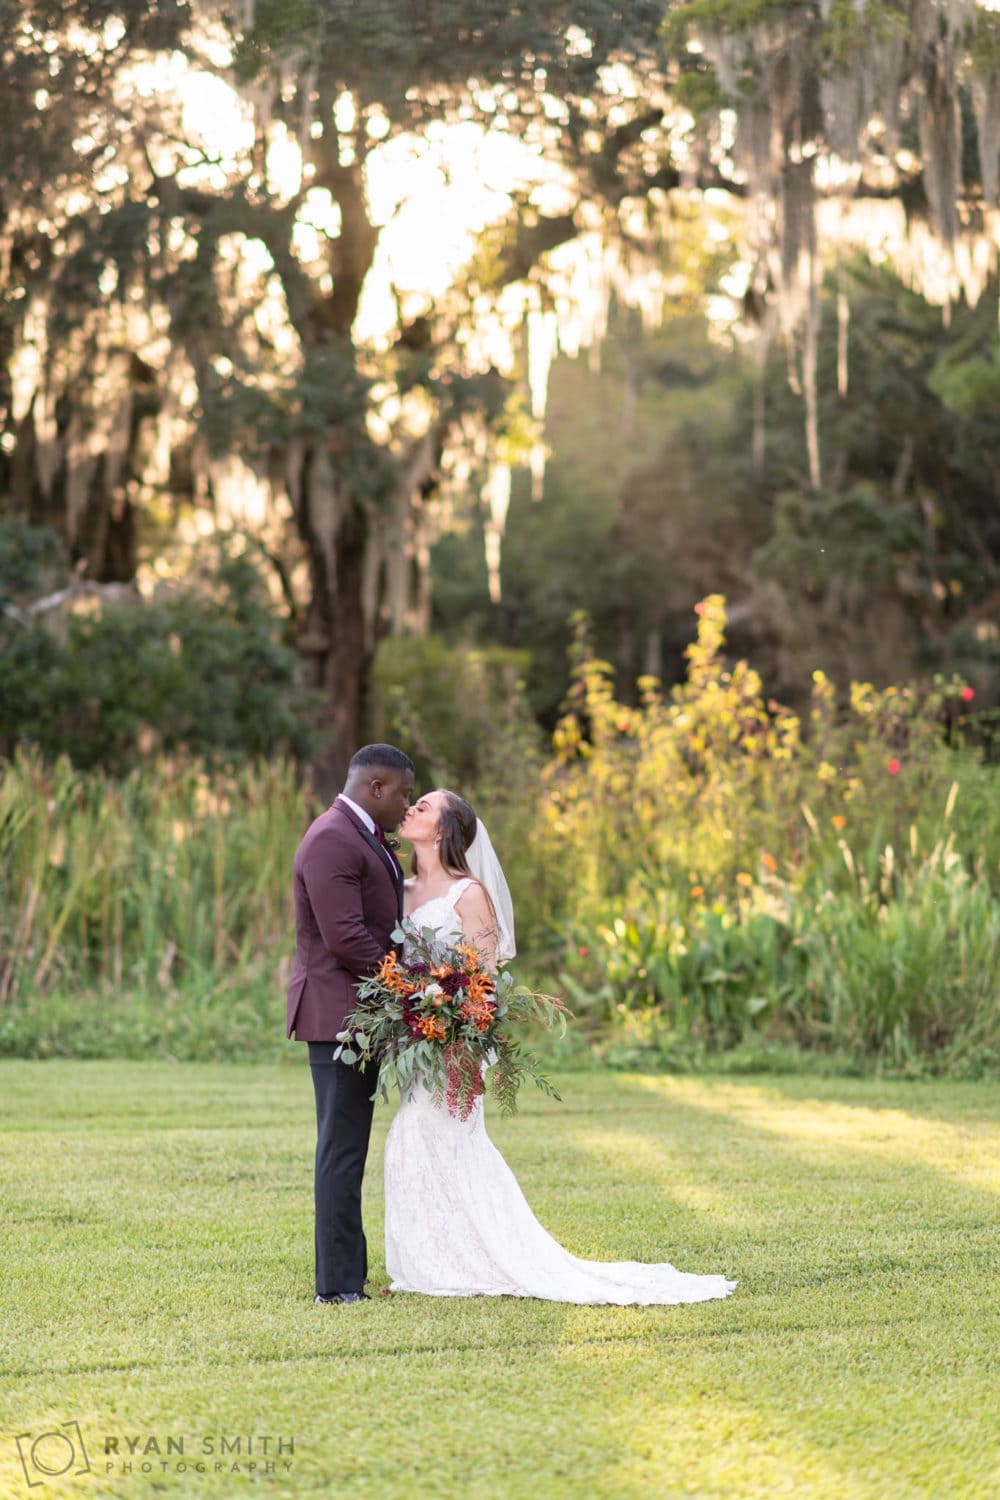 Bride and groom in front of the sunset filtering through the oaks - Magnolia Plantation - Charleston, SC